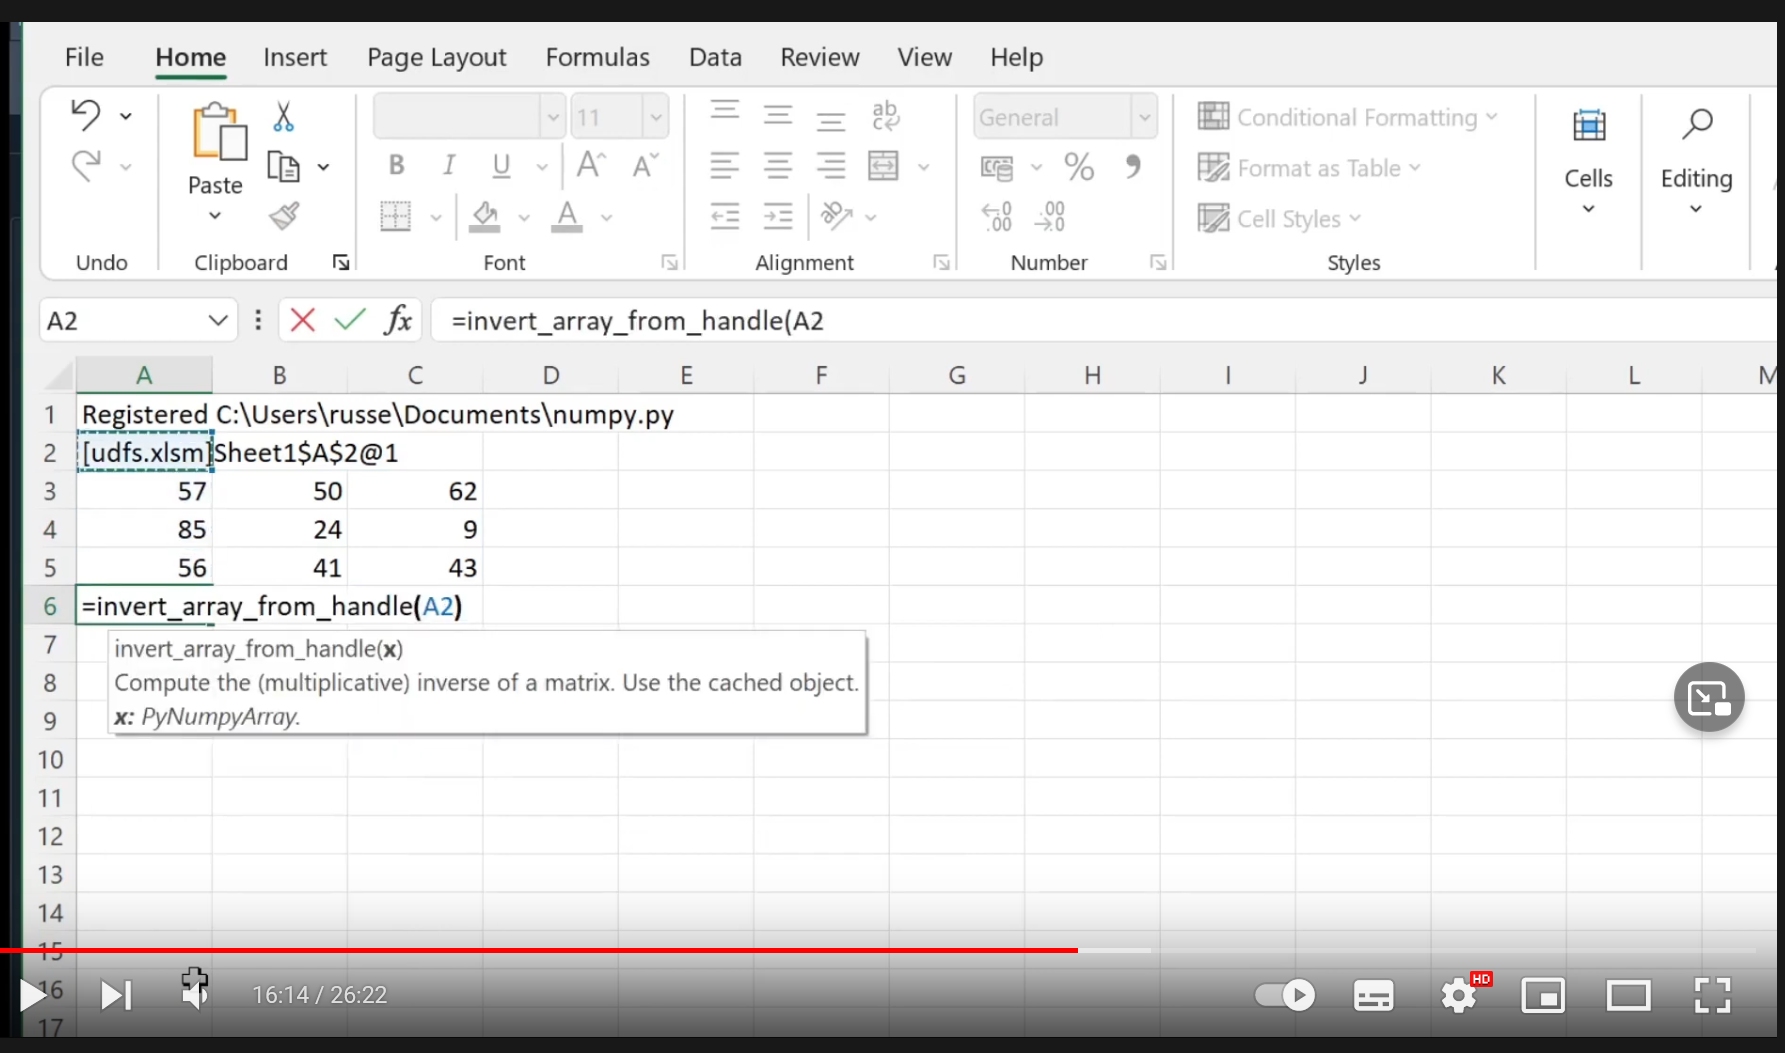 Load video: A video overview of the features within xlSlim that make it easy to use Python in Excel.